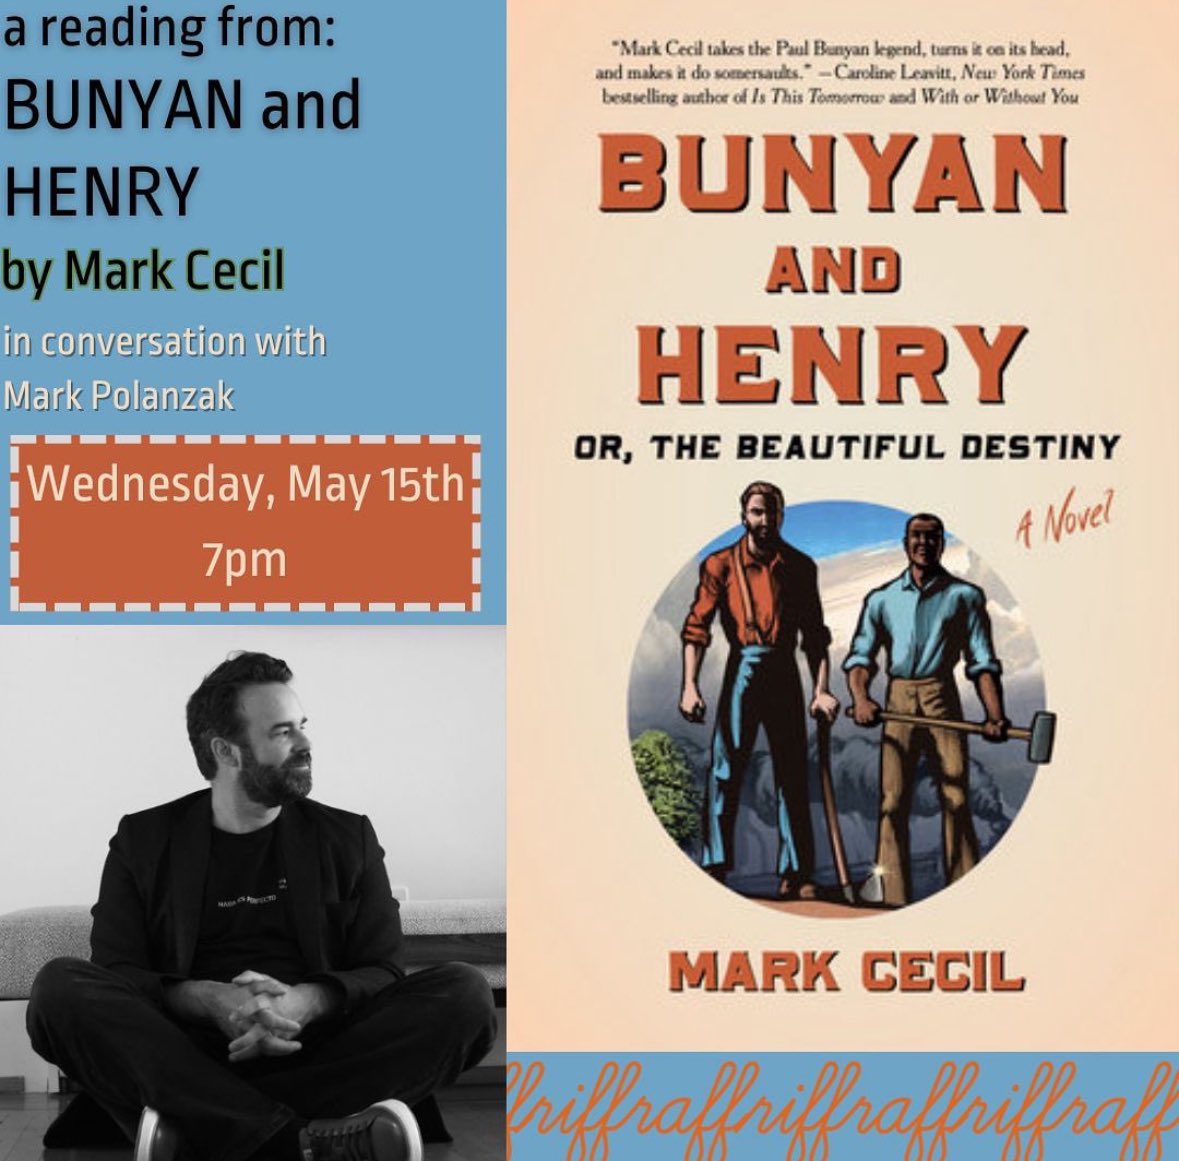 This Wednesday 5-15 I'll be in Providence with author Mark Polanzak at Riffraff Bookstore and Bar. Mark is one of the raddest dudes anywhere. This convo about #BunyanAndHenry is gonna be fun.